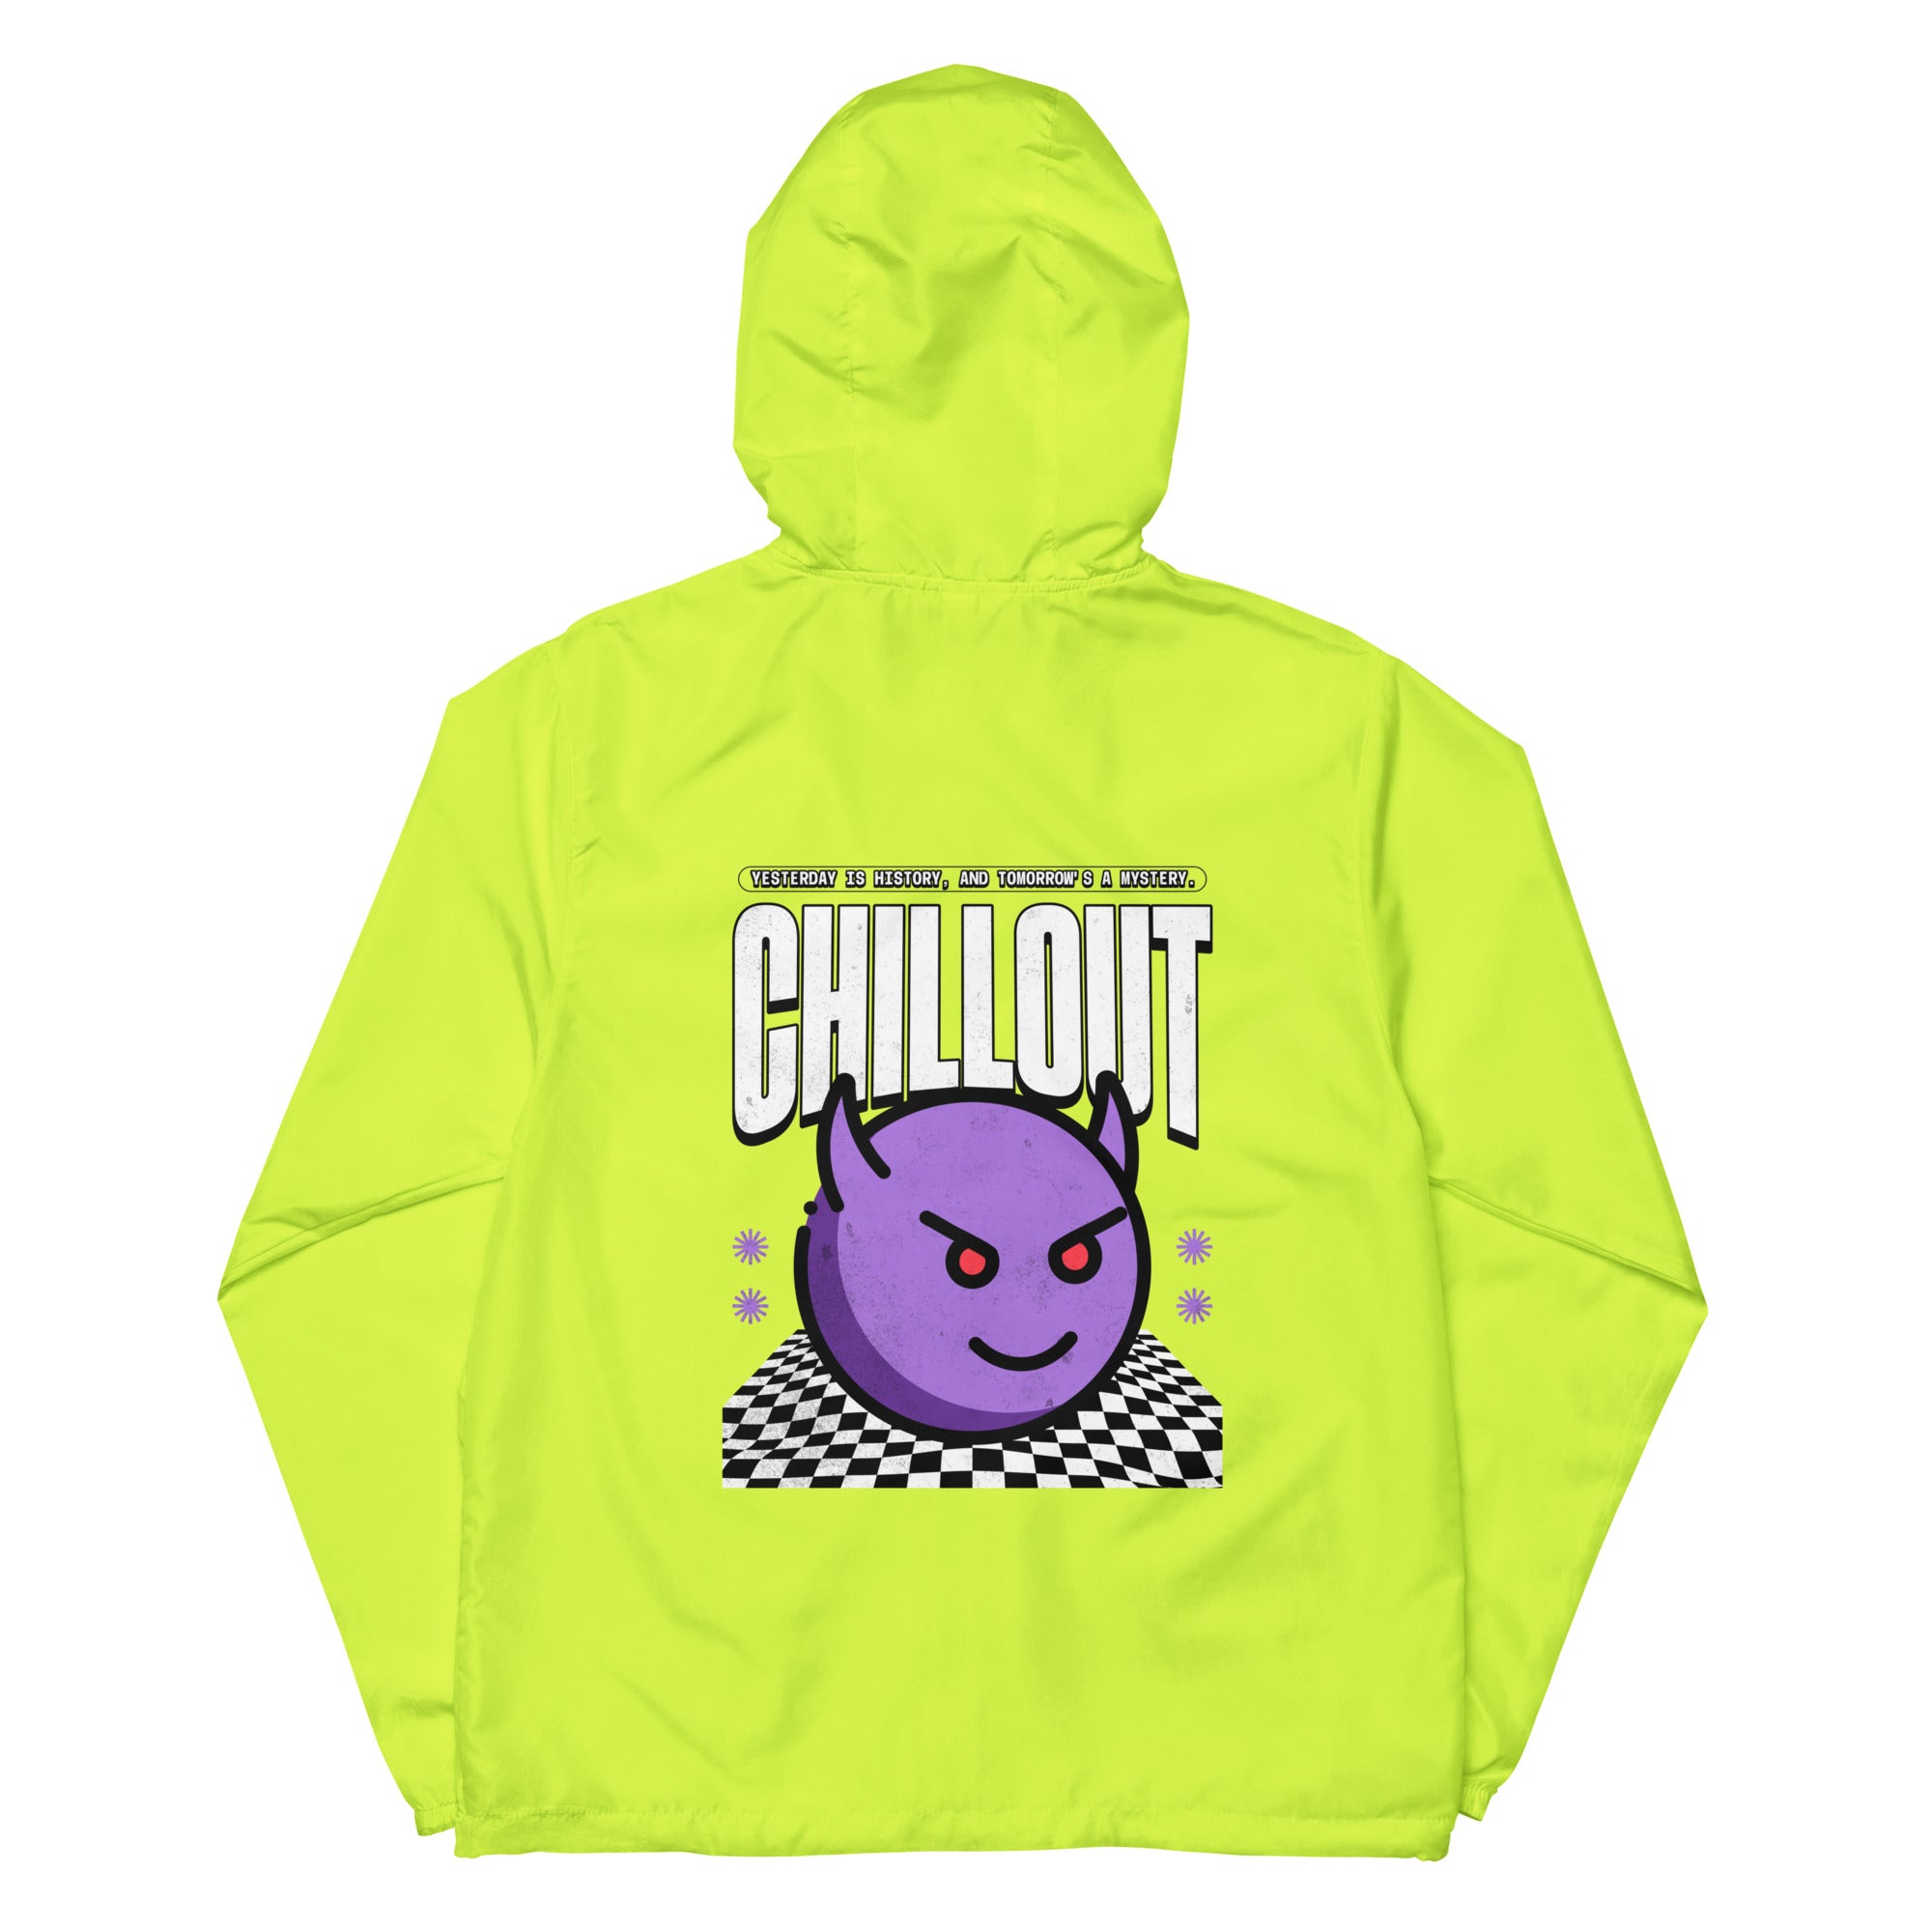 SORTYGO - Chillout Men Zip Up Windbreaker in Safety Yellow